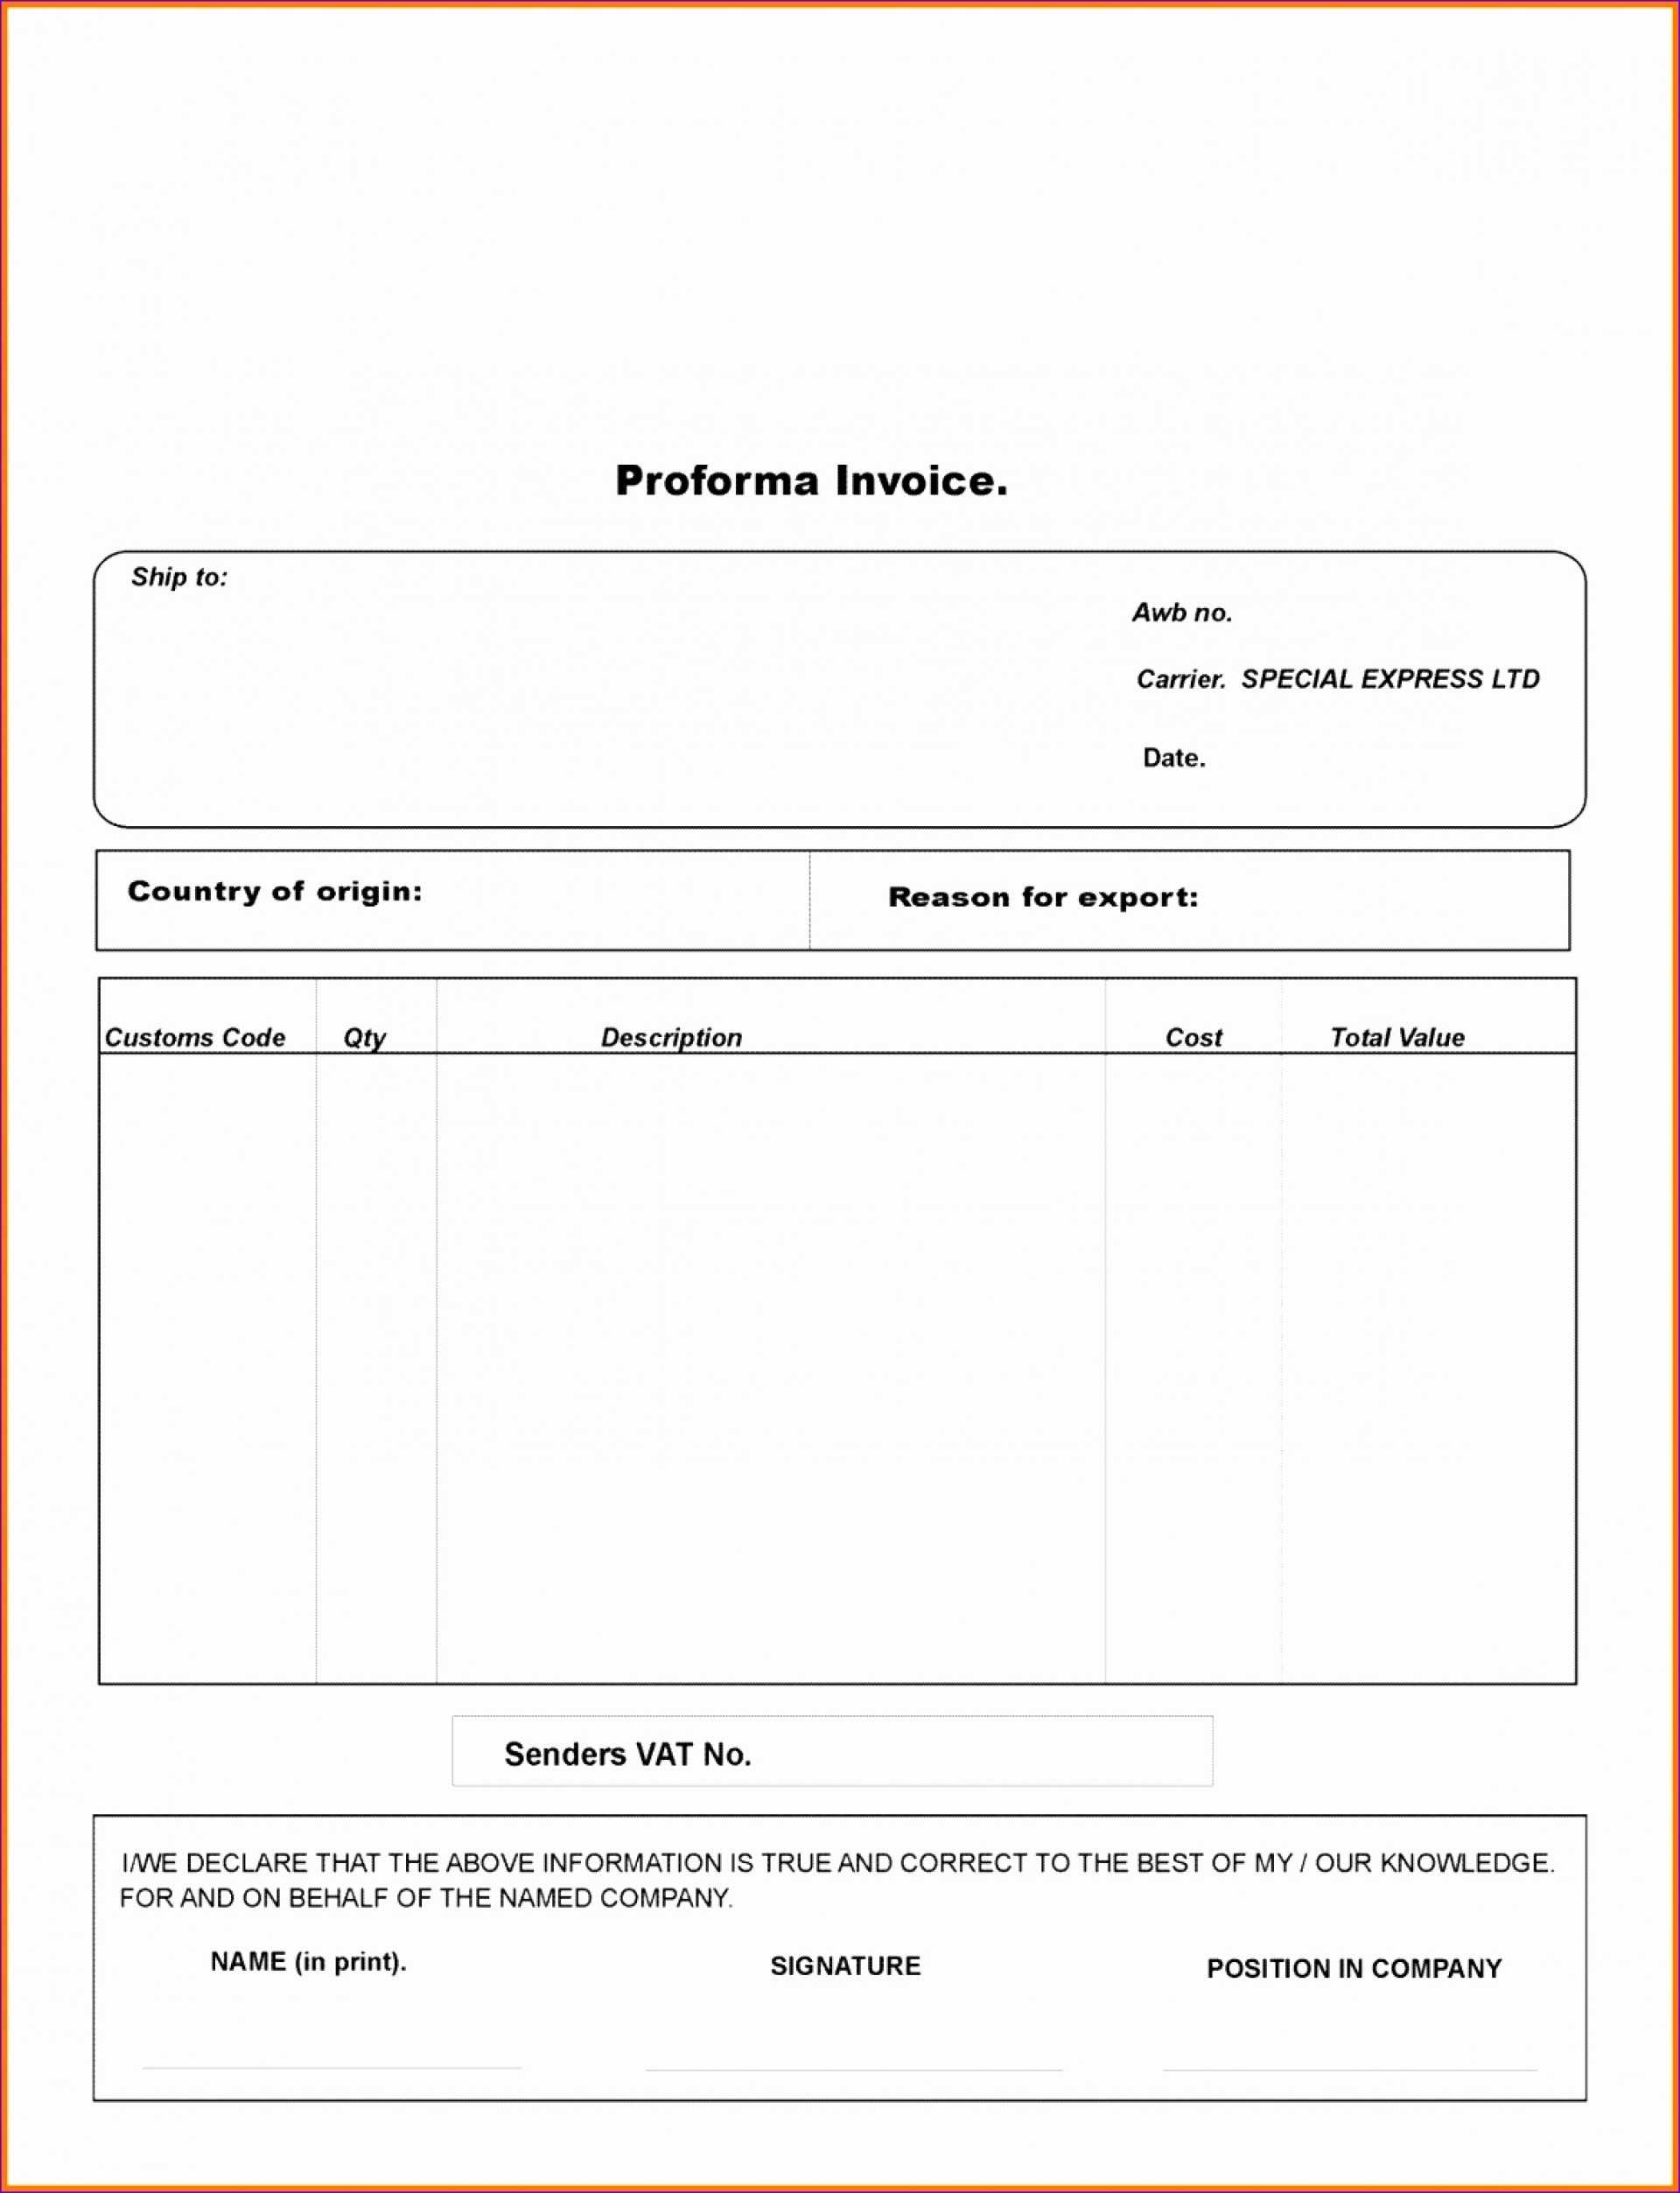 028 Proforma Invoice Template Pdf Free Download Ideas Simple With Regard To Free Proforma Invoice Template Word